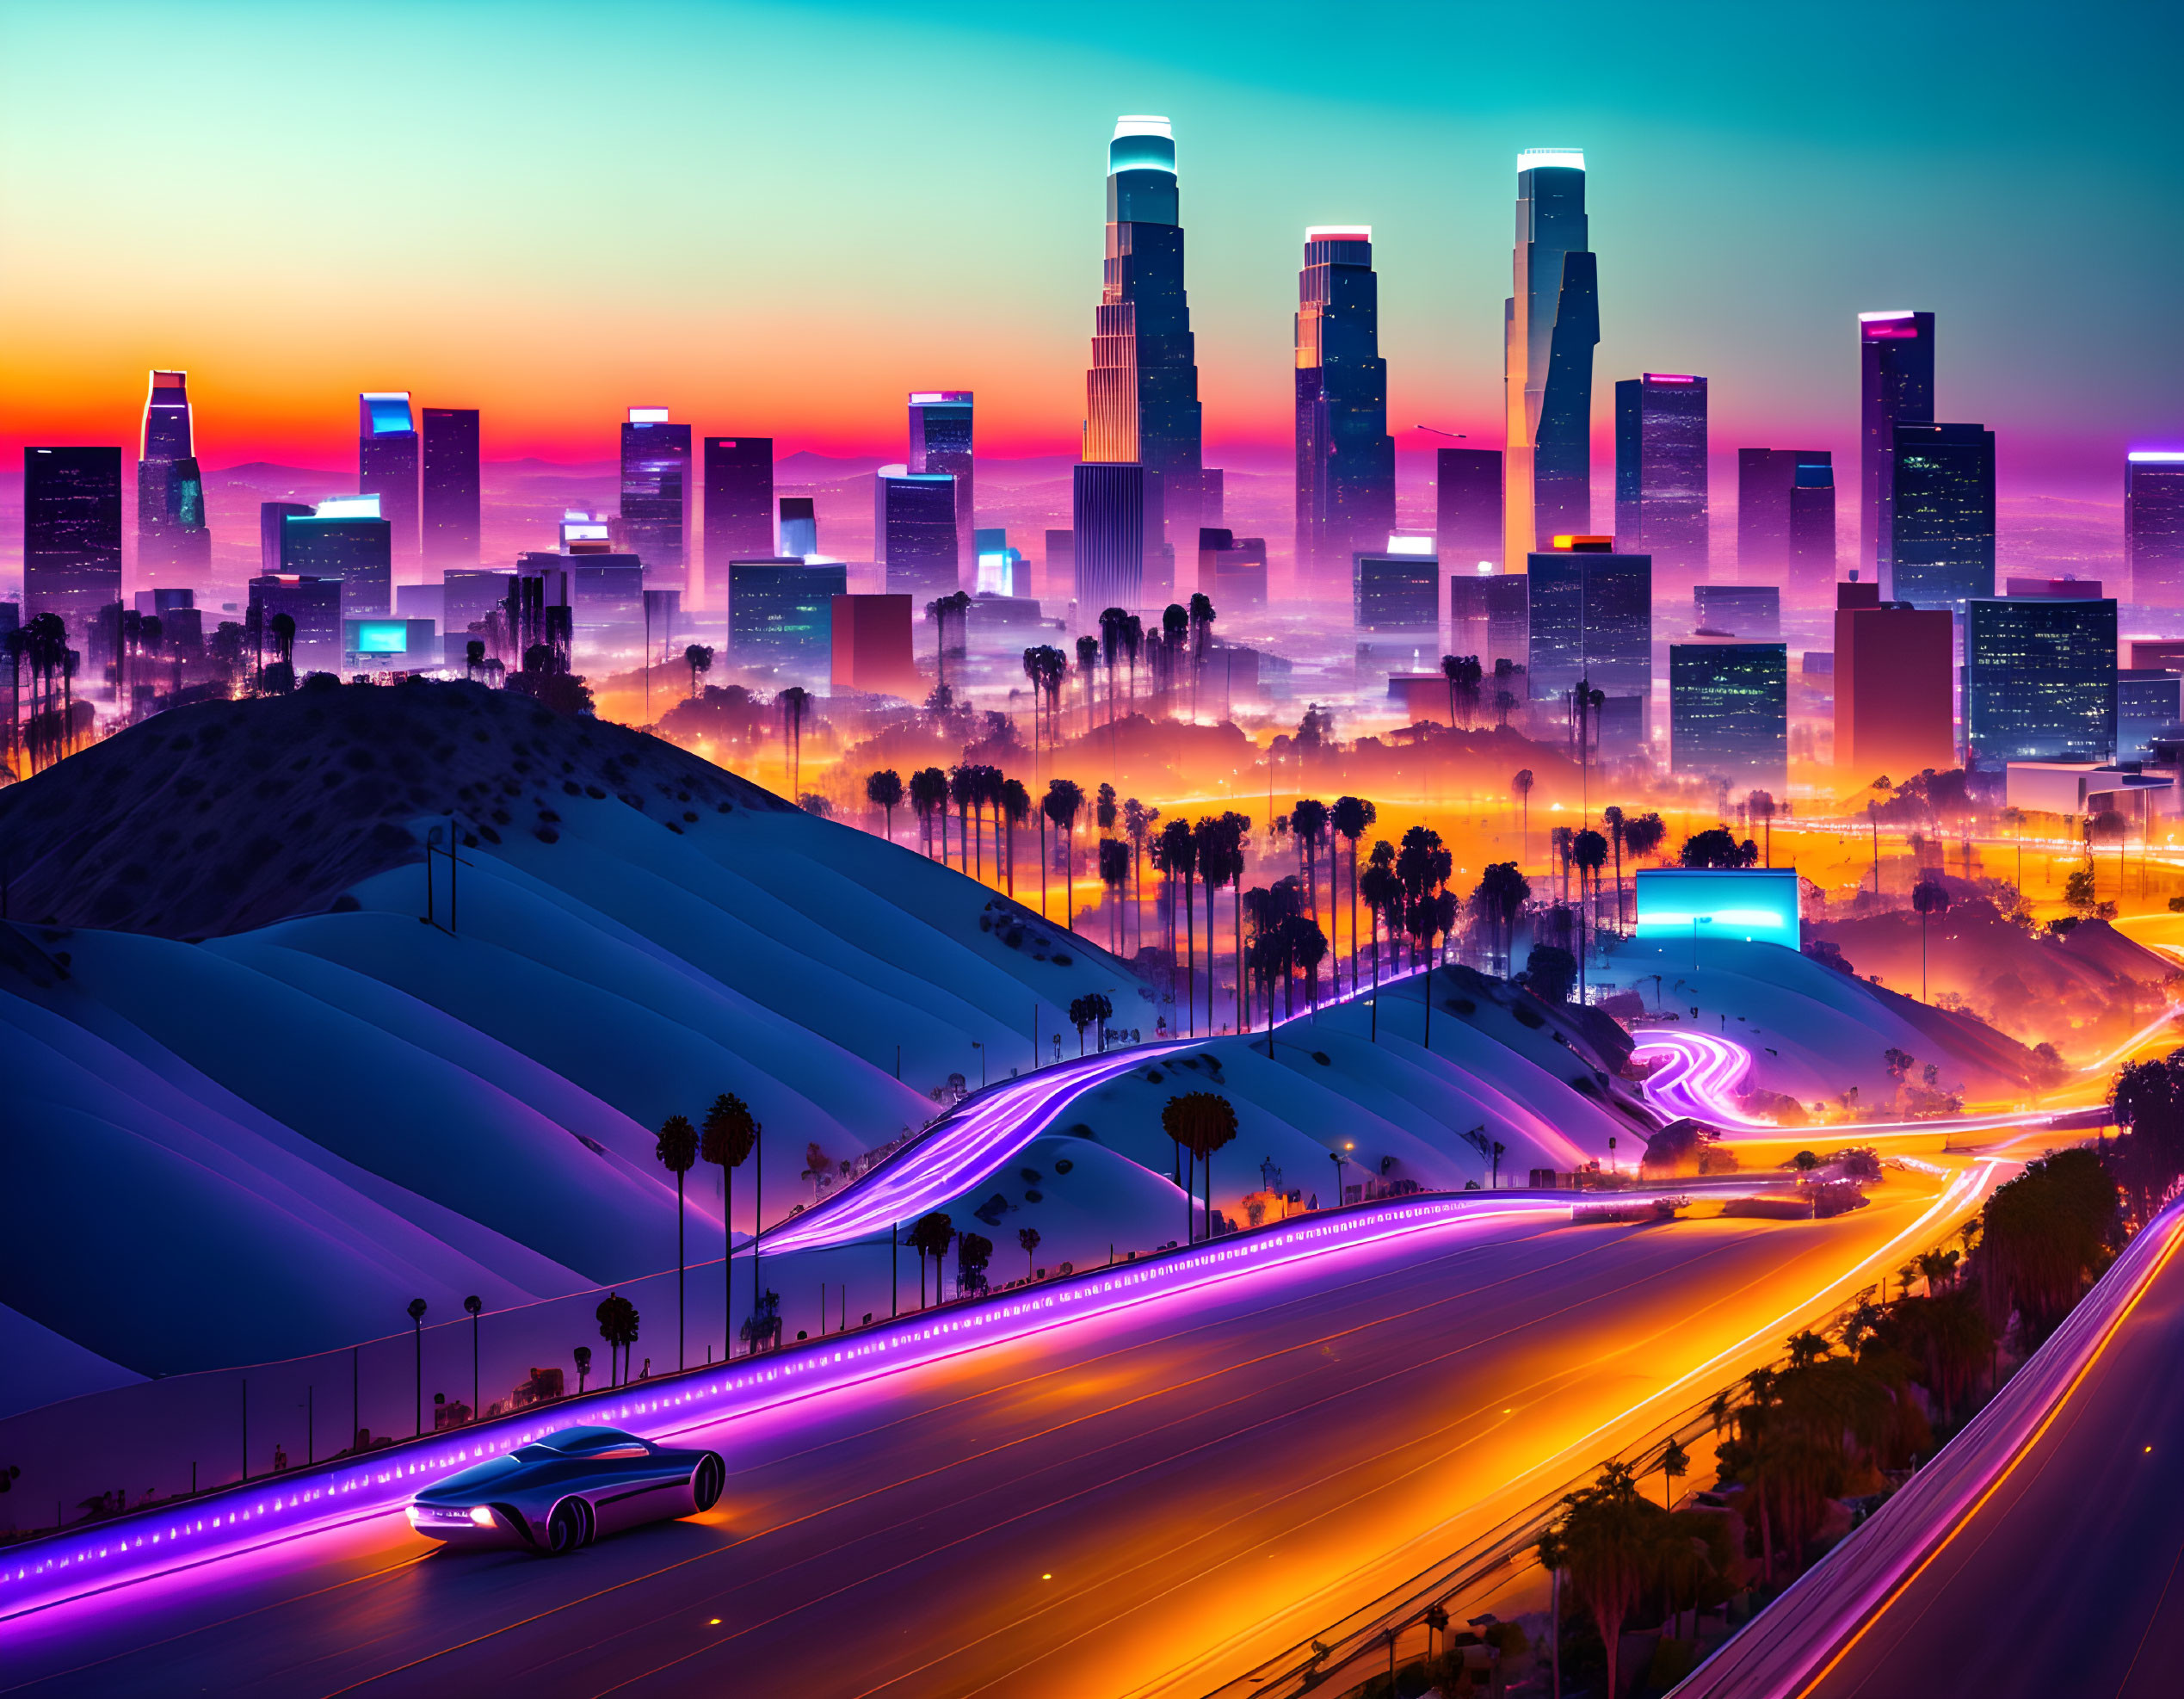 Colorful Twilight Cityscape with Skyscrapers and Light Trails